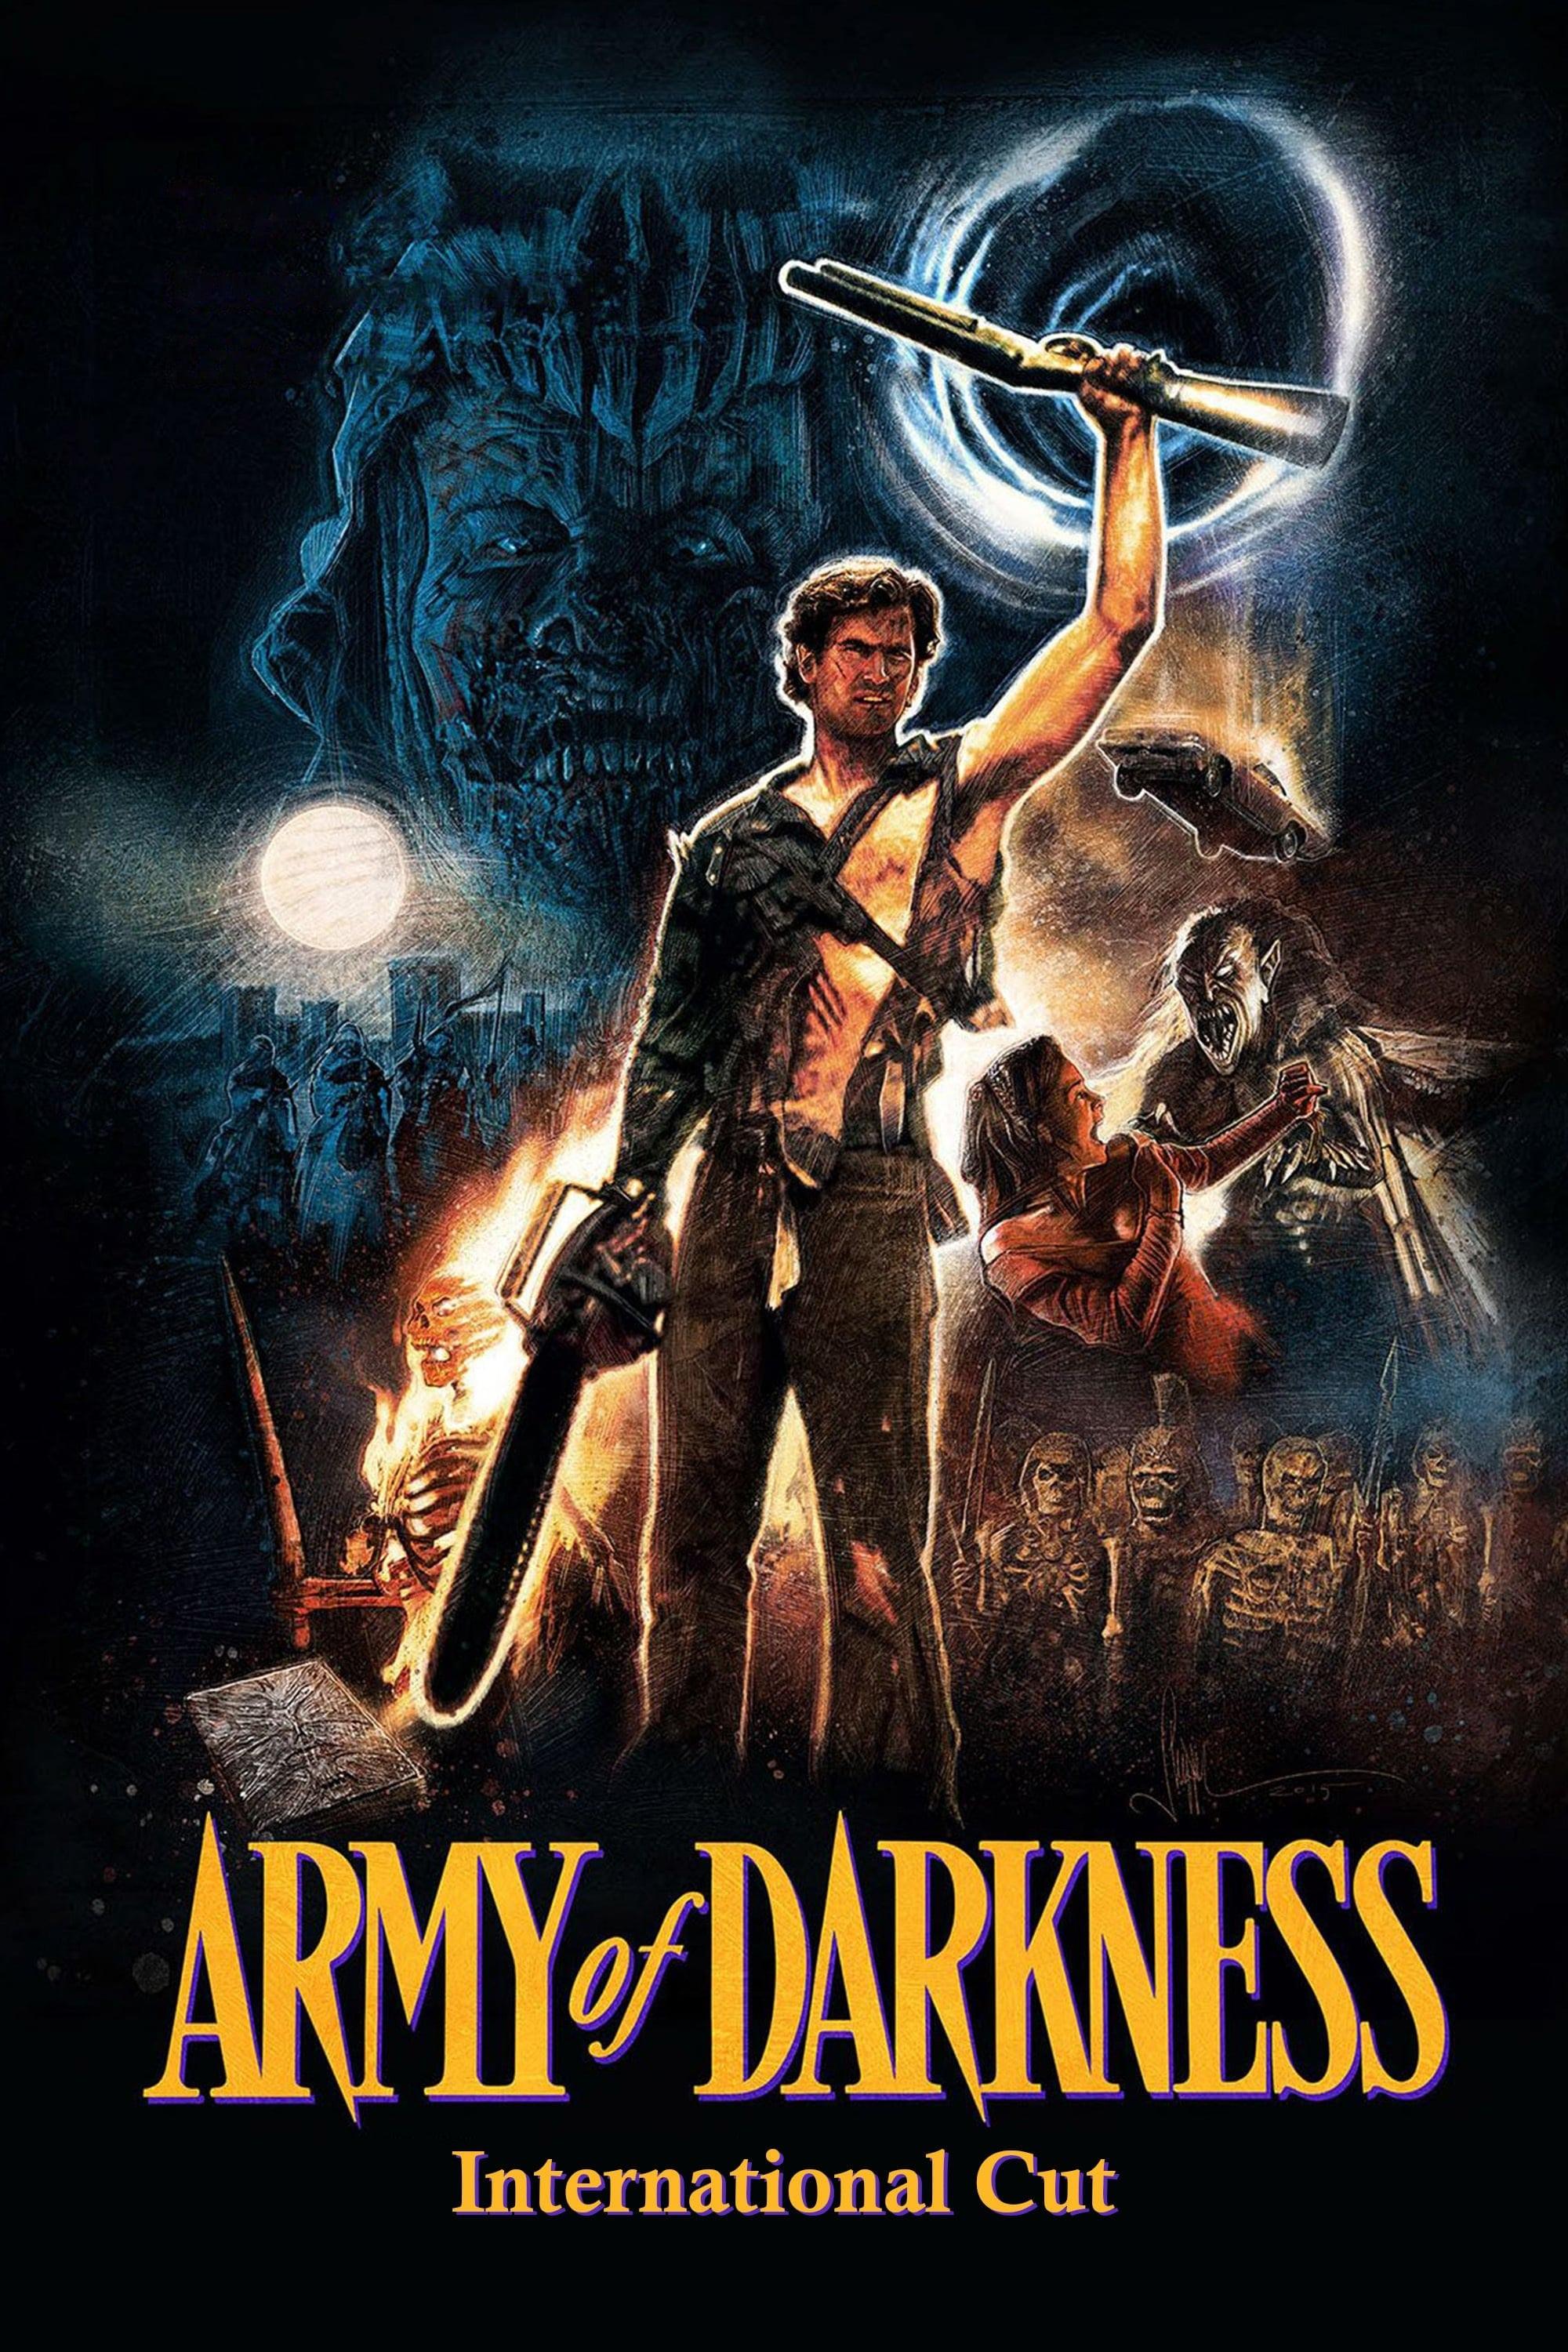 Army of Darkness poster